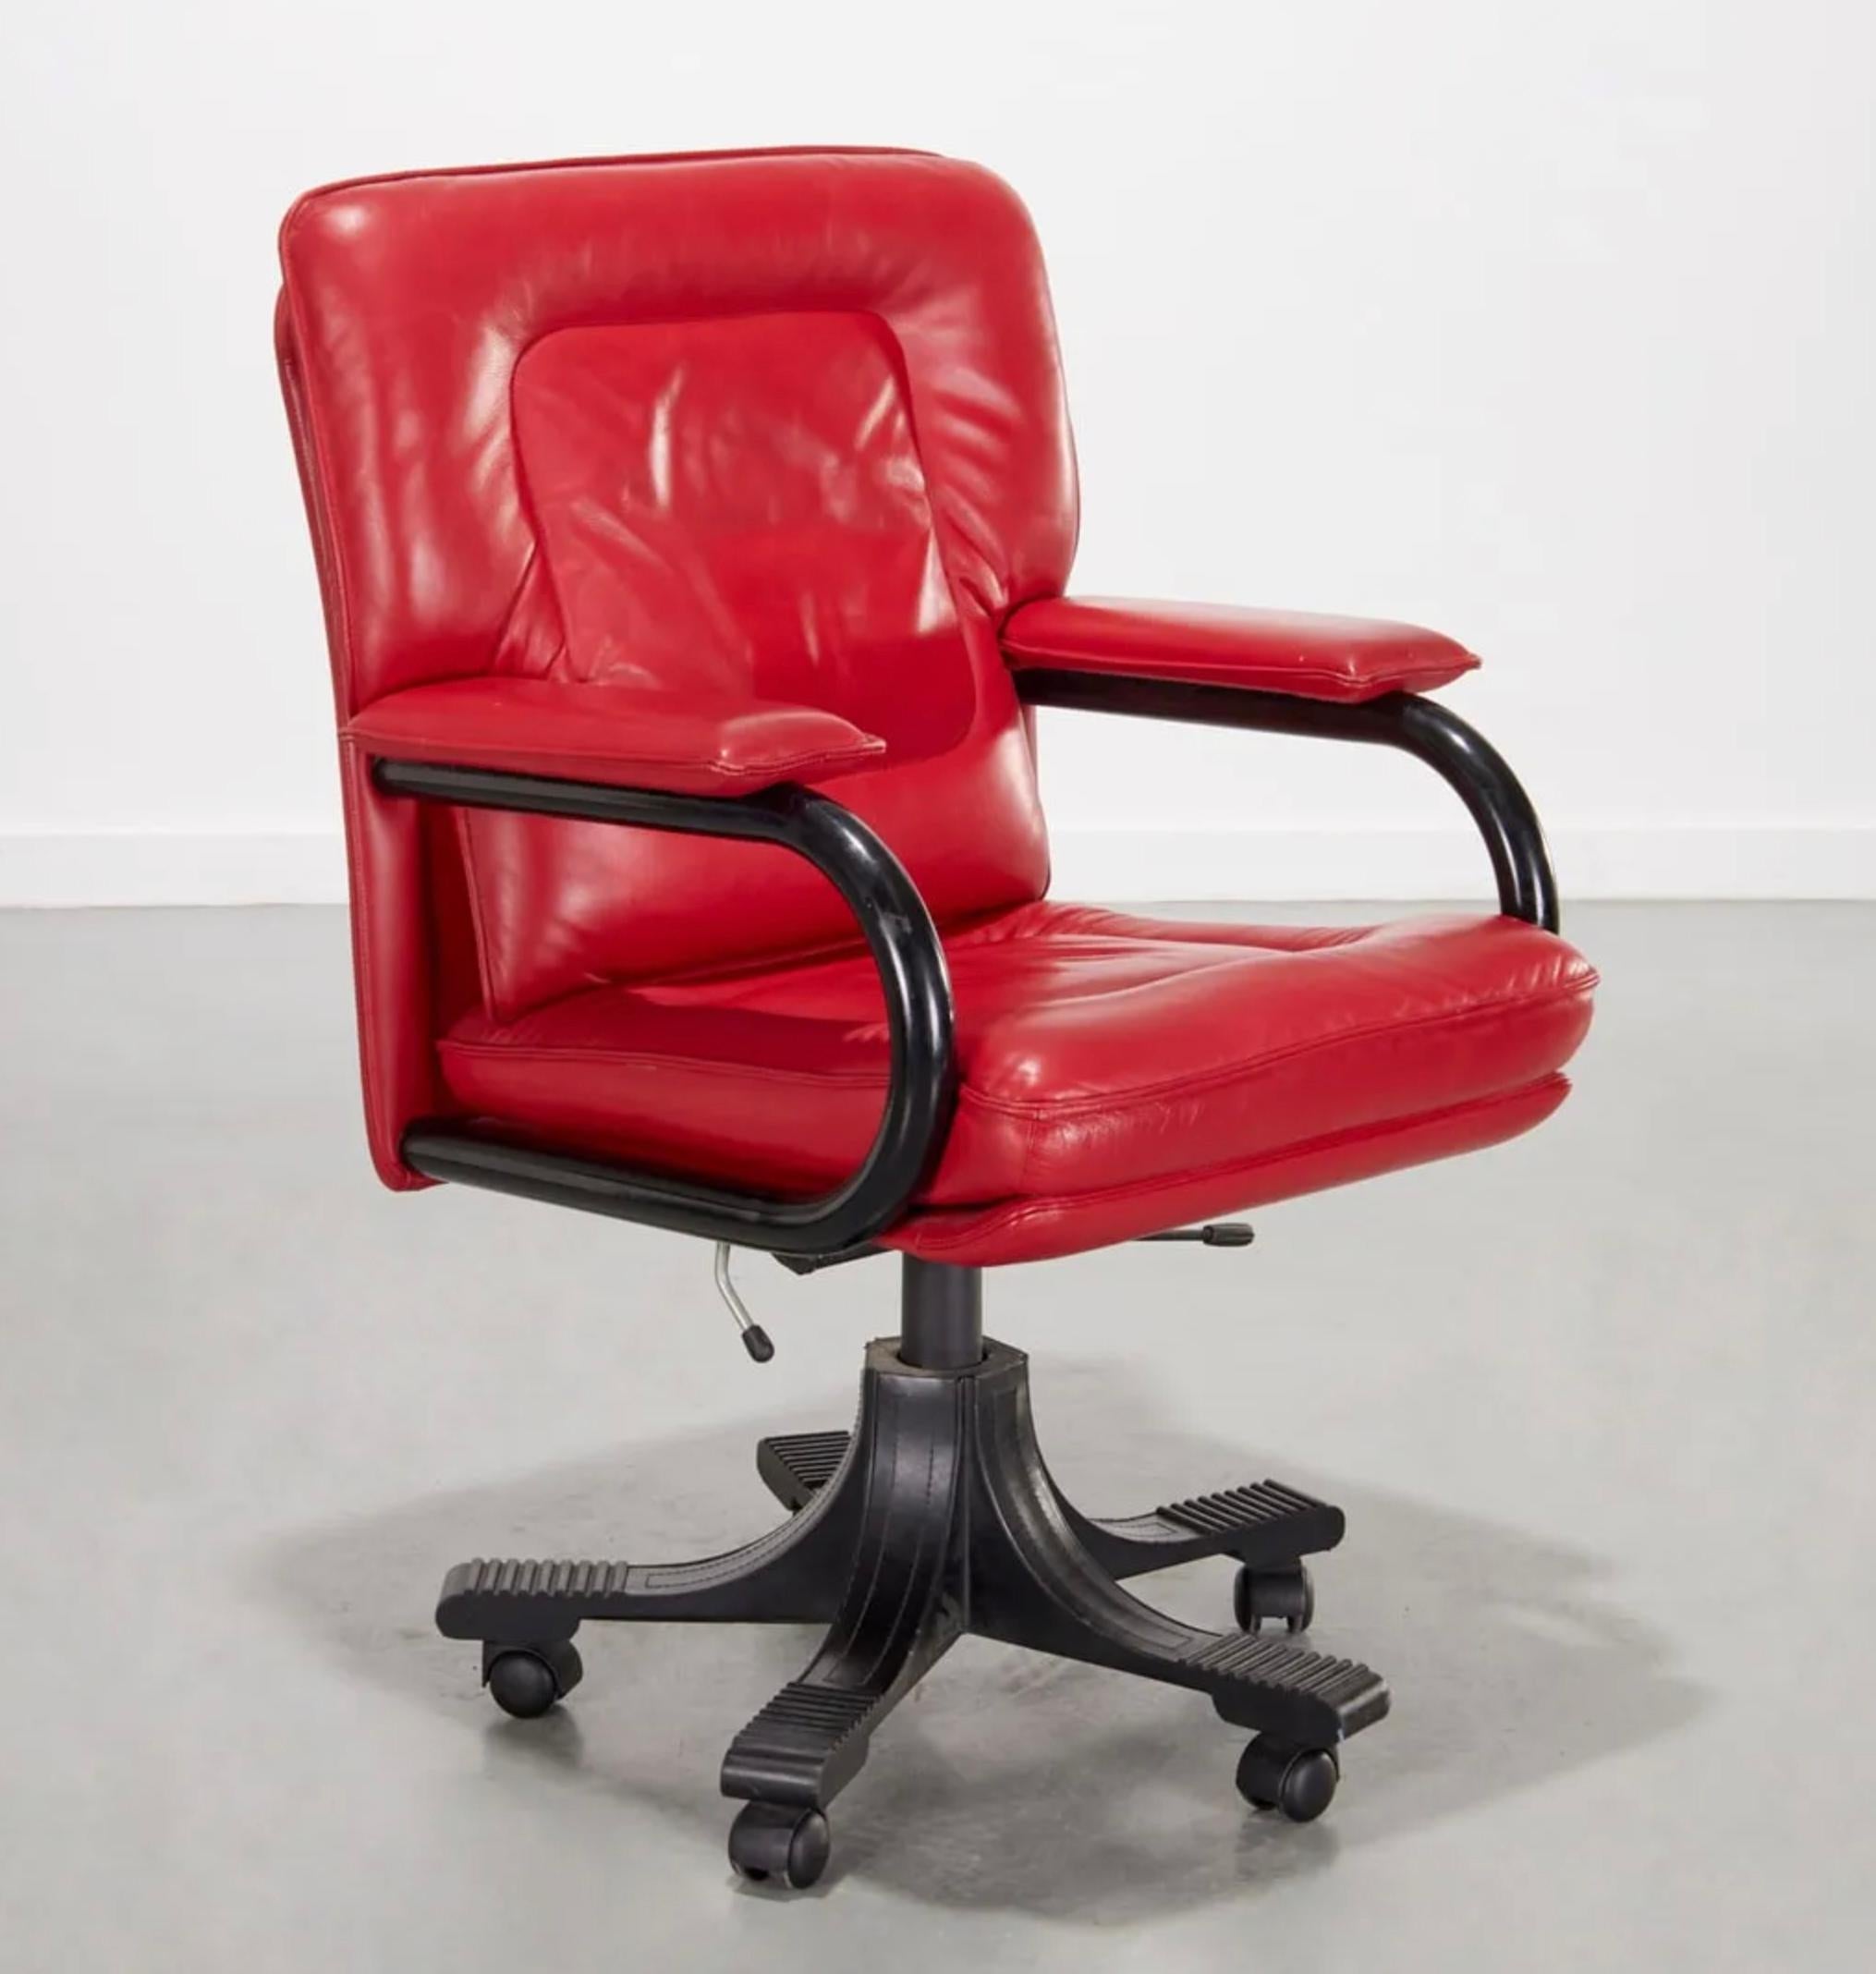 Elegant Guido Faleschini swivel management soft pad chair. Designed for i4 Mariani and retailed in the 1970s and 1980s by The Pace Collection. Underneath the chair is a telescoping mechanism to raise/lower the seat height on the chair, which can be